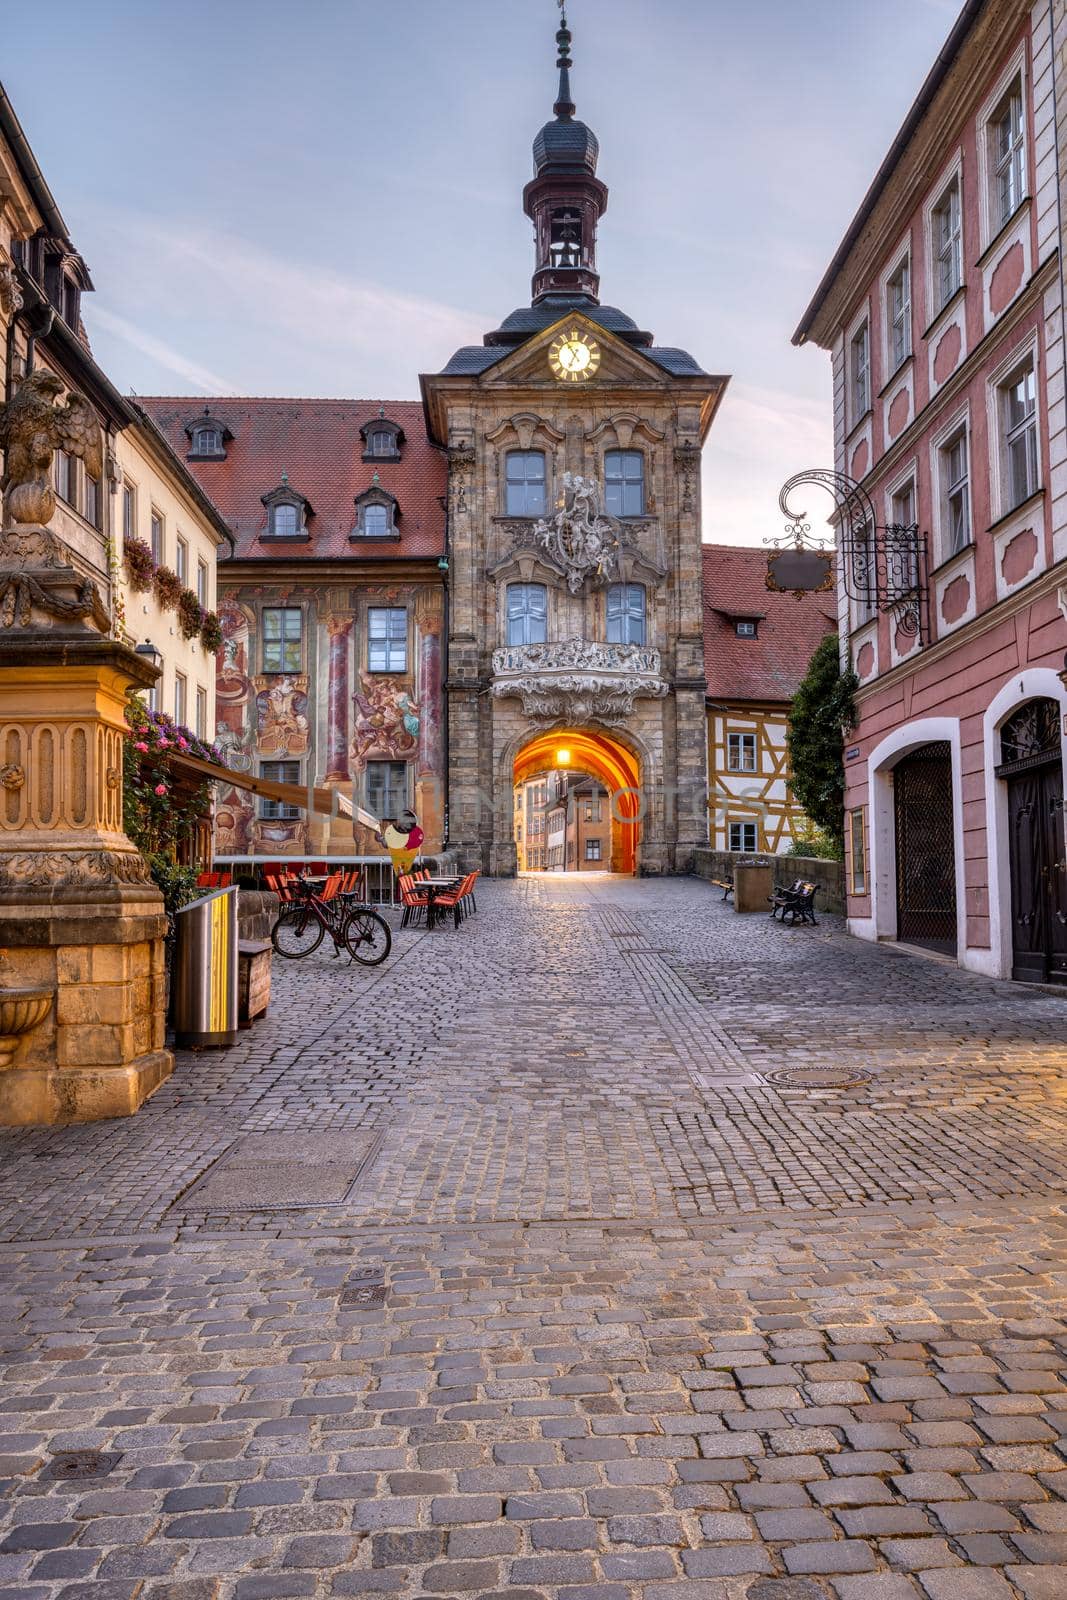 The old town of Bamberg in Bavaria with the famous historic town hall at dawn